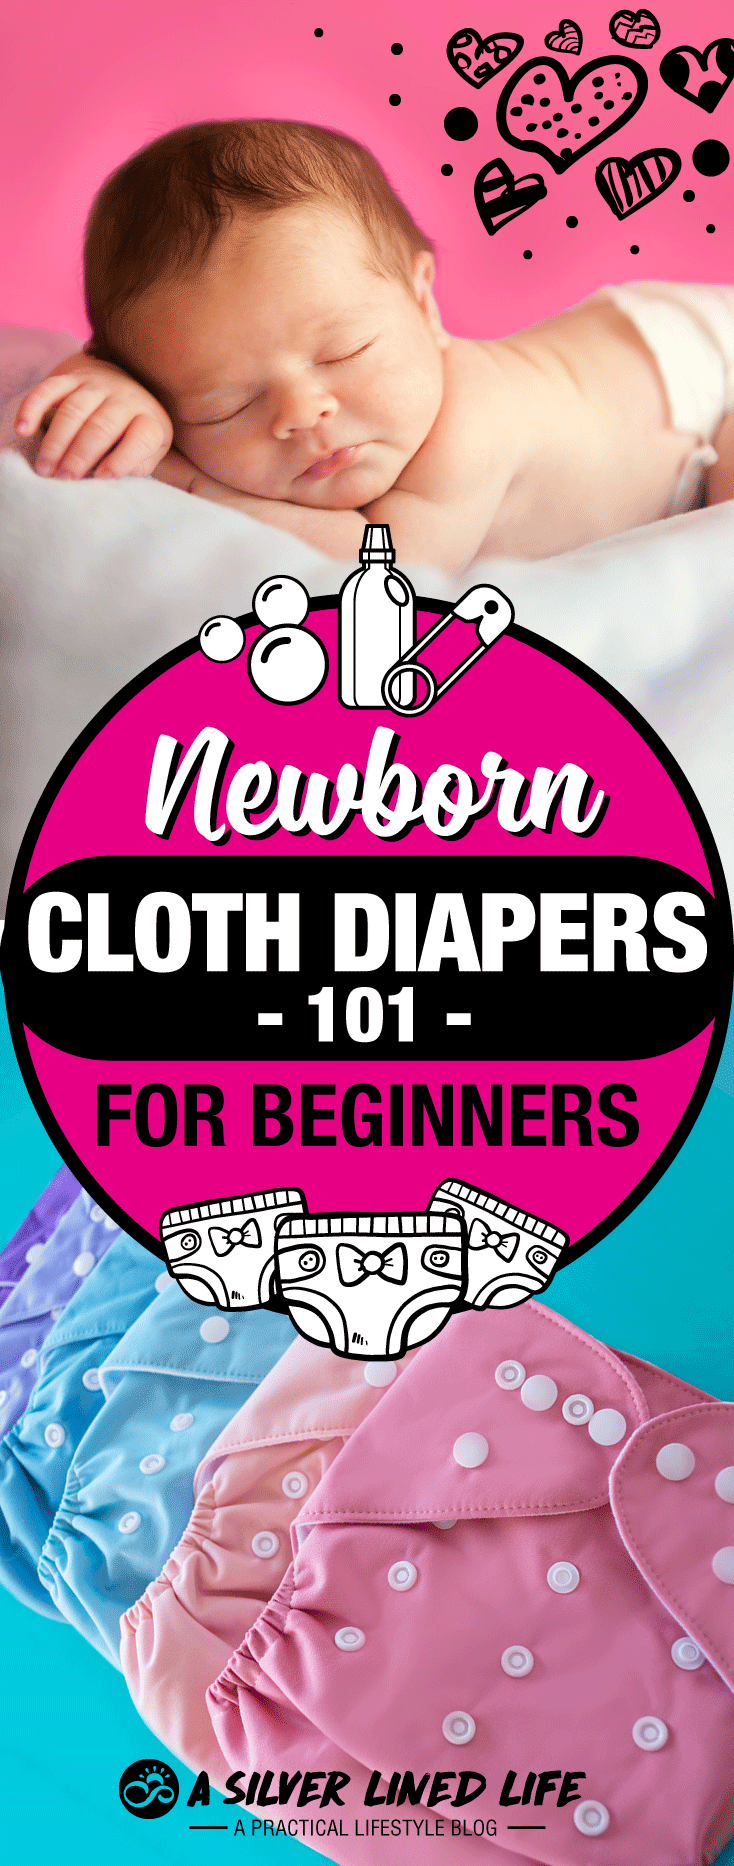 Newborn Cloth Diapering 101: For Beginners. Everything you need to know about cloth diapering your baby! The best cloth diapers, washing, where to buy them, how to use them, types of cloth diapers and more!! In this post you will find a complete list for your newborn or baby regarding cloth diapers. Best of luck on your cloth diapering journey! <3 #clothdiapers #momtips #parenting #SLL